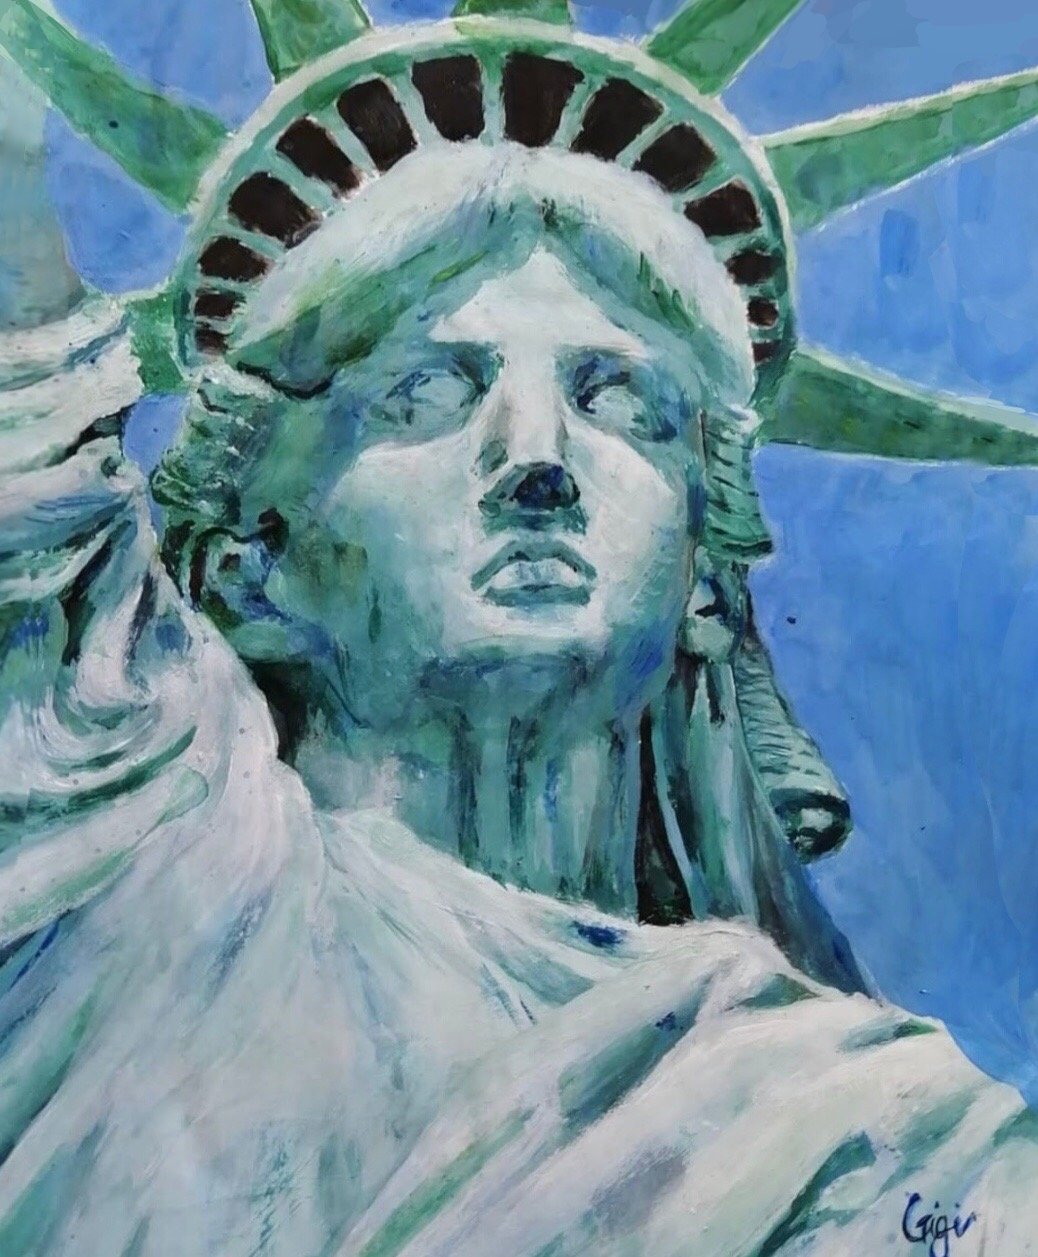 A painting of the statue of liberty